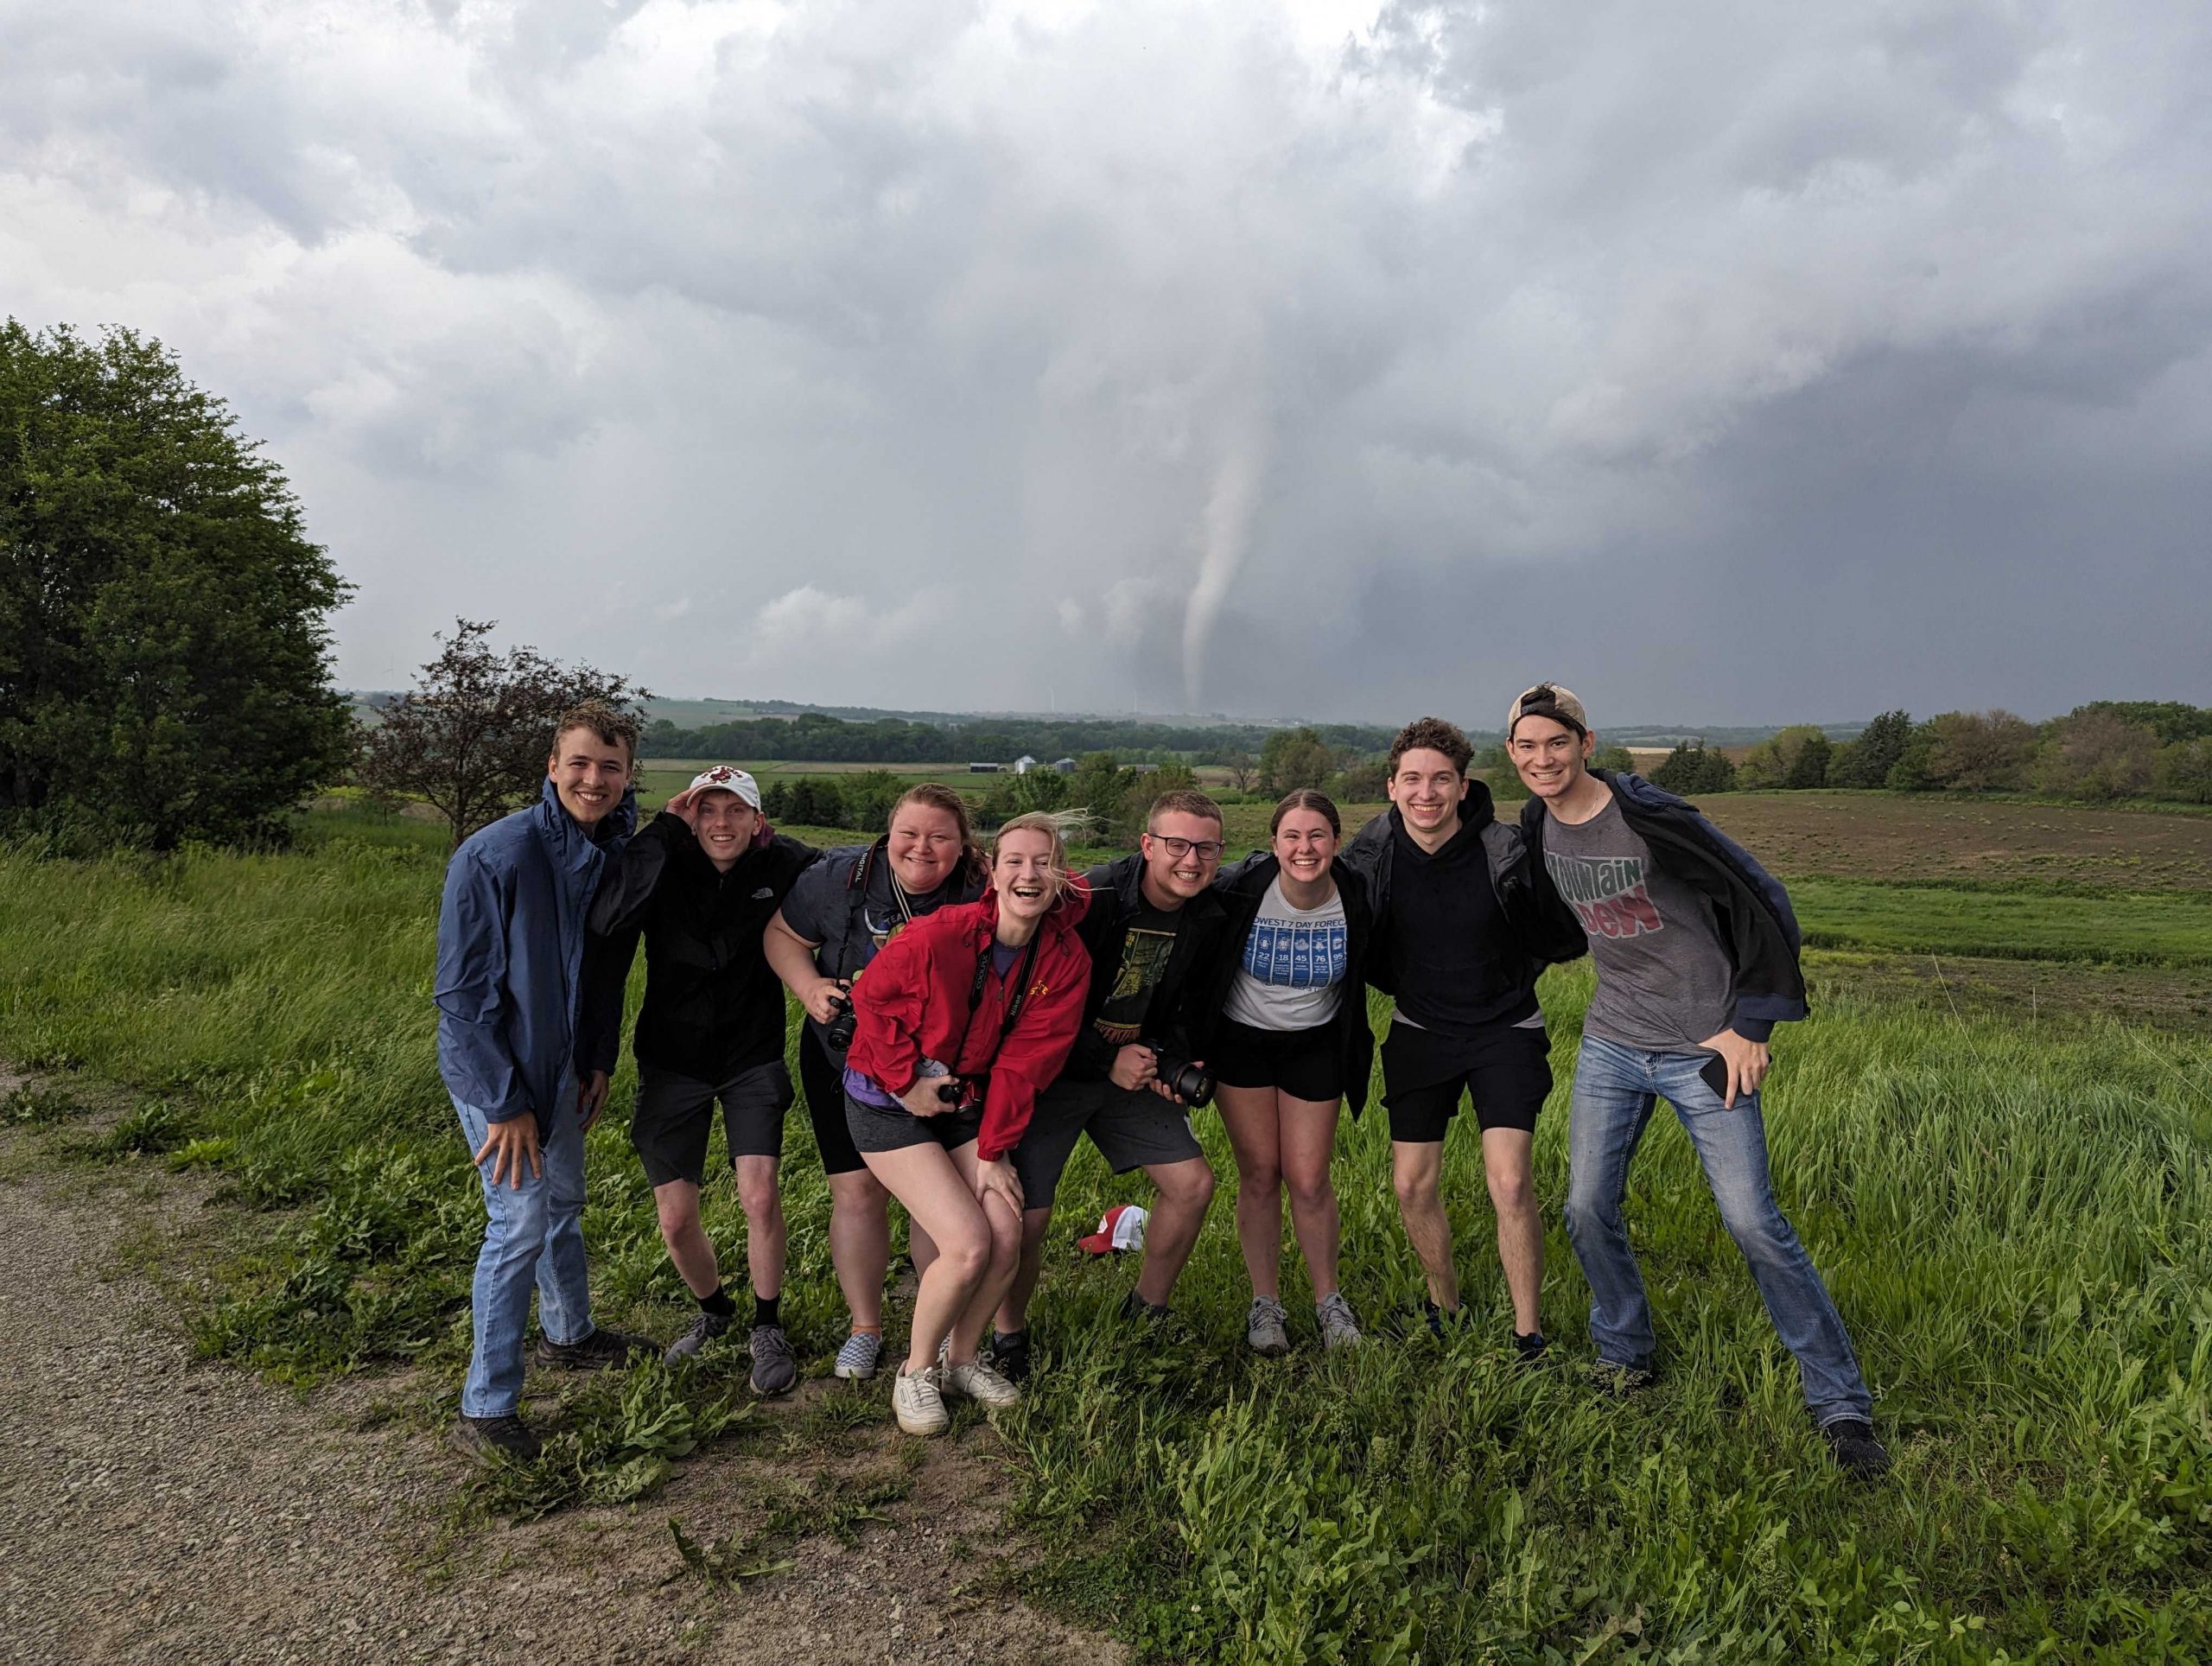 Students storm chasing with a tornado in the distant background